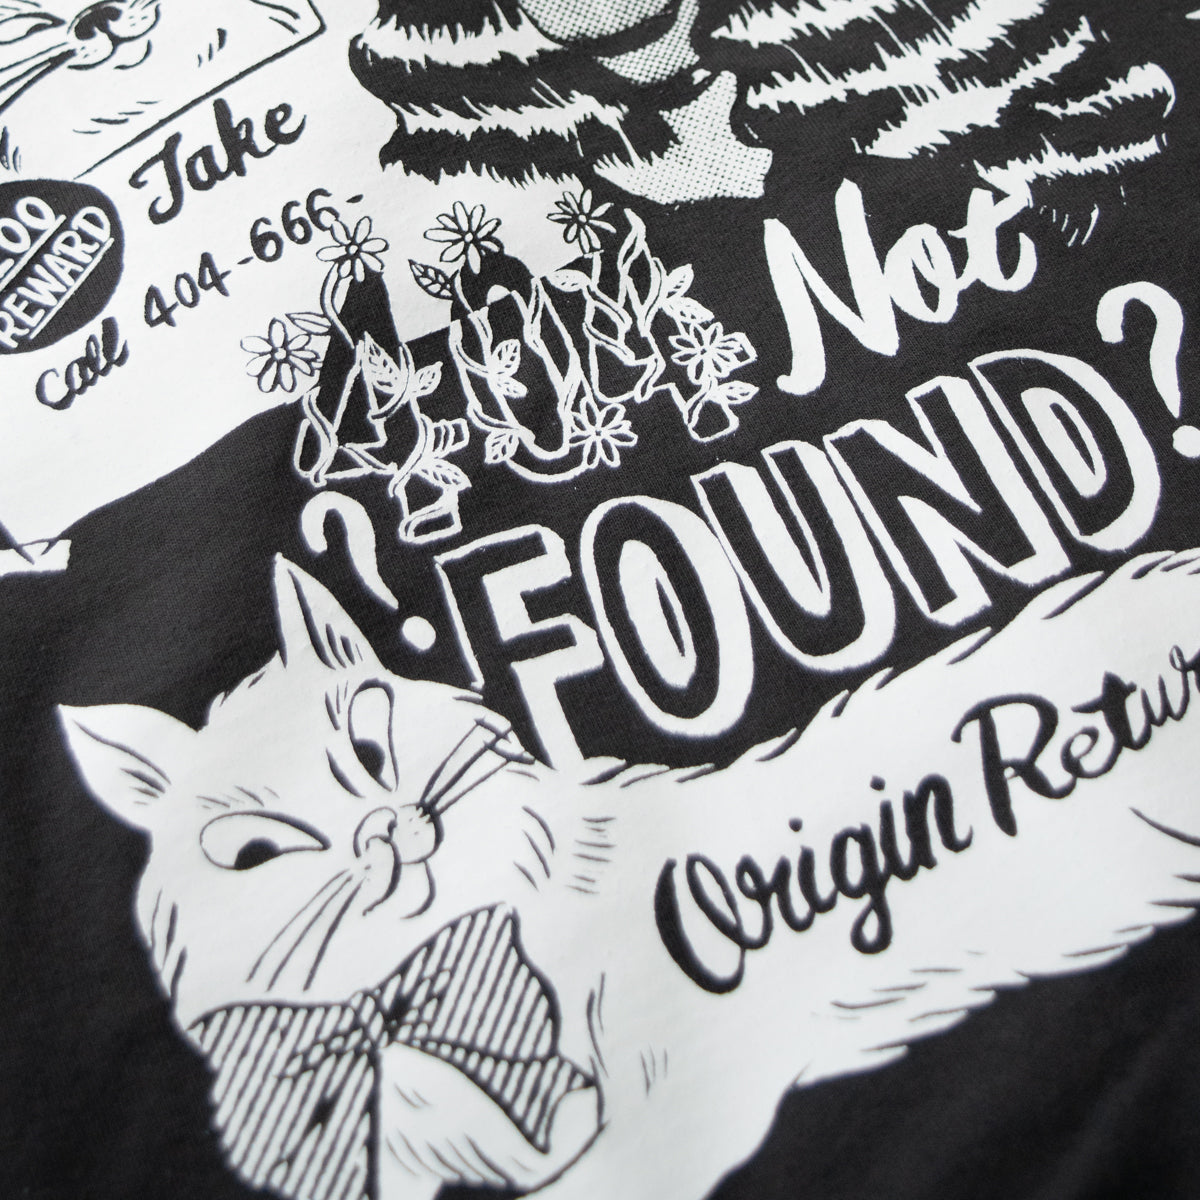 404 NOT FOUND by Gummy ビッグシルエット 長袖Tシャツ ロンT CHARCOAL